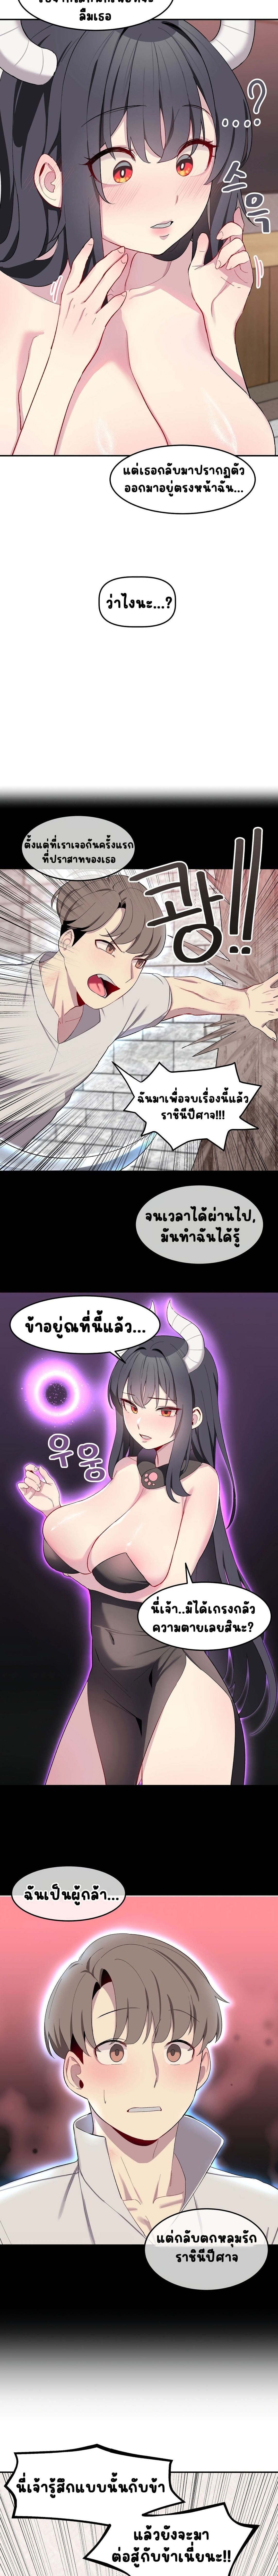 Hospitalized Life in Another World ตอนที่ 3 ภาพ 1